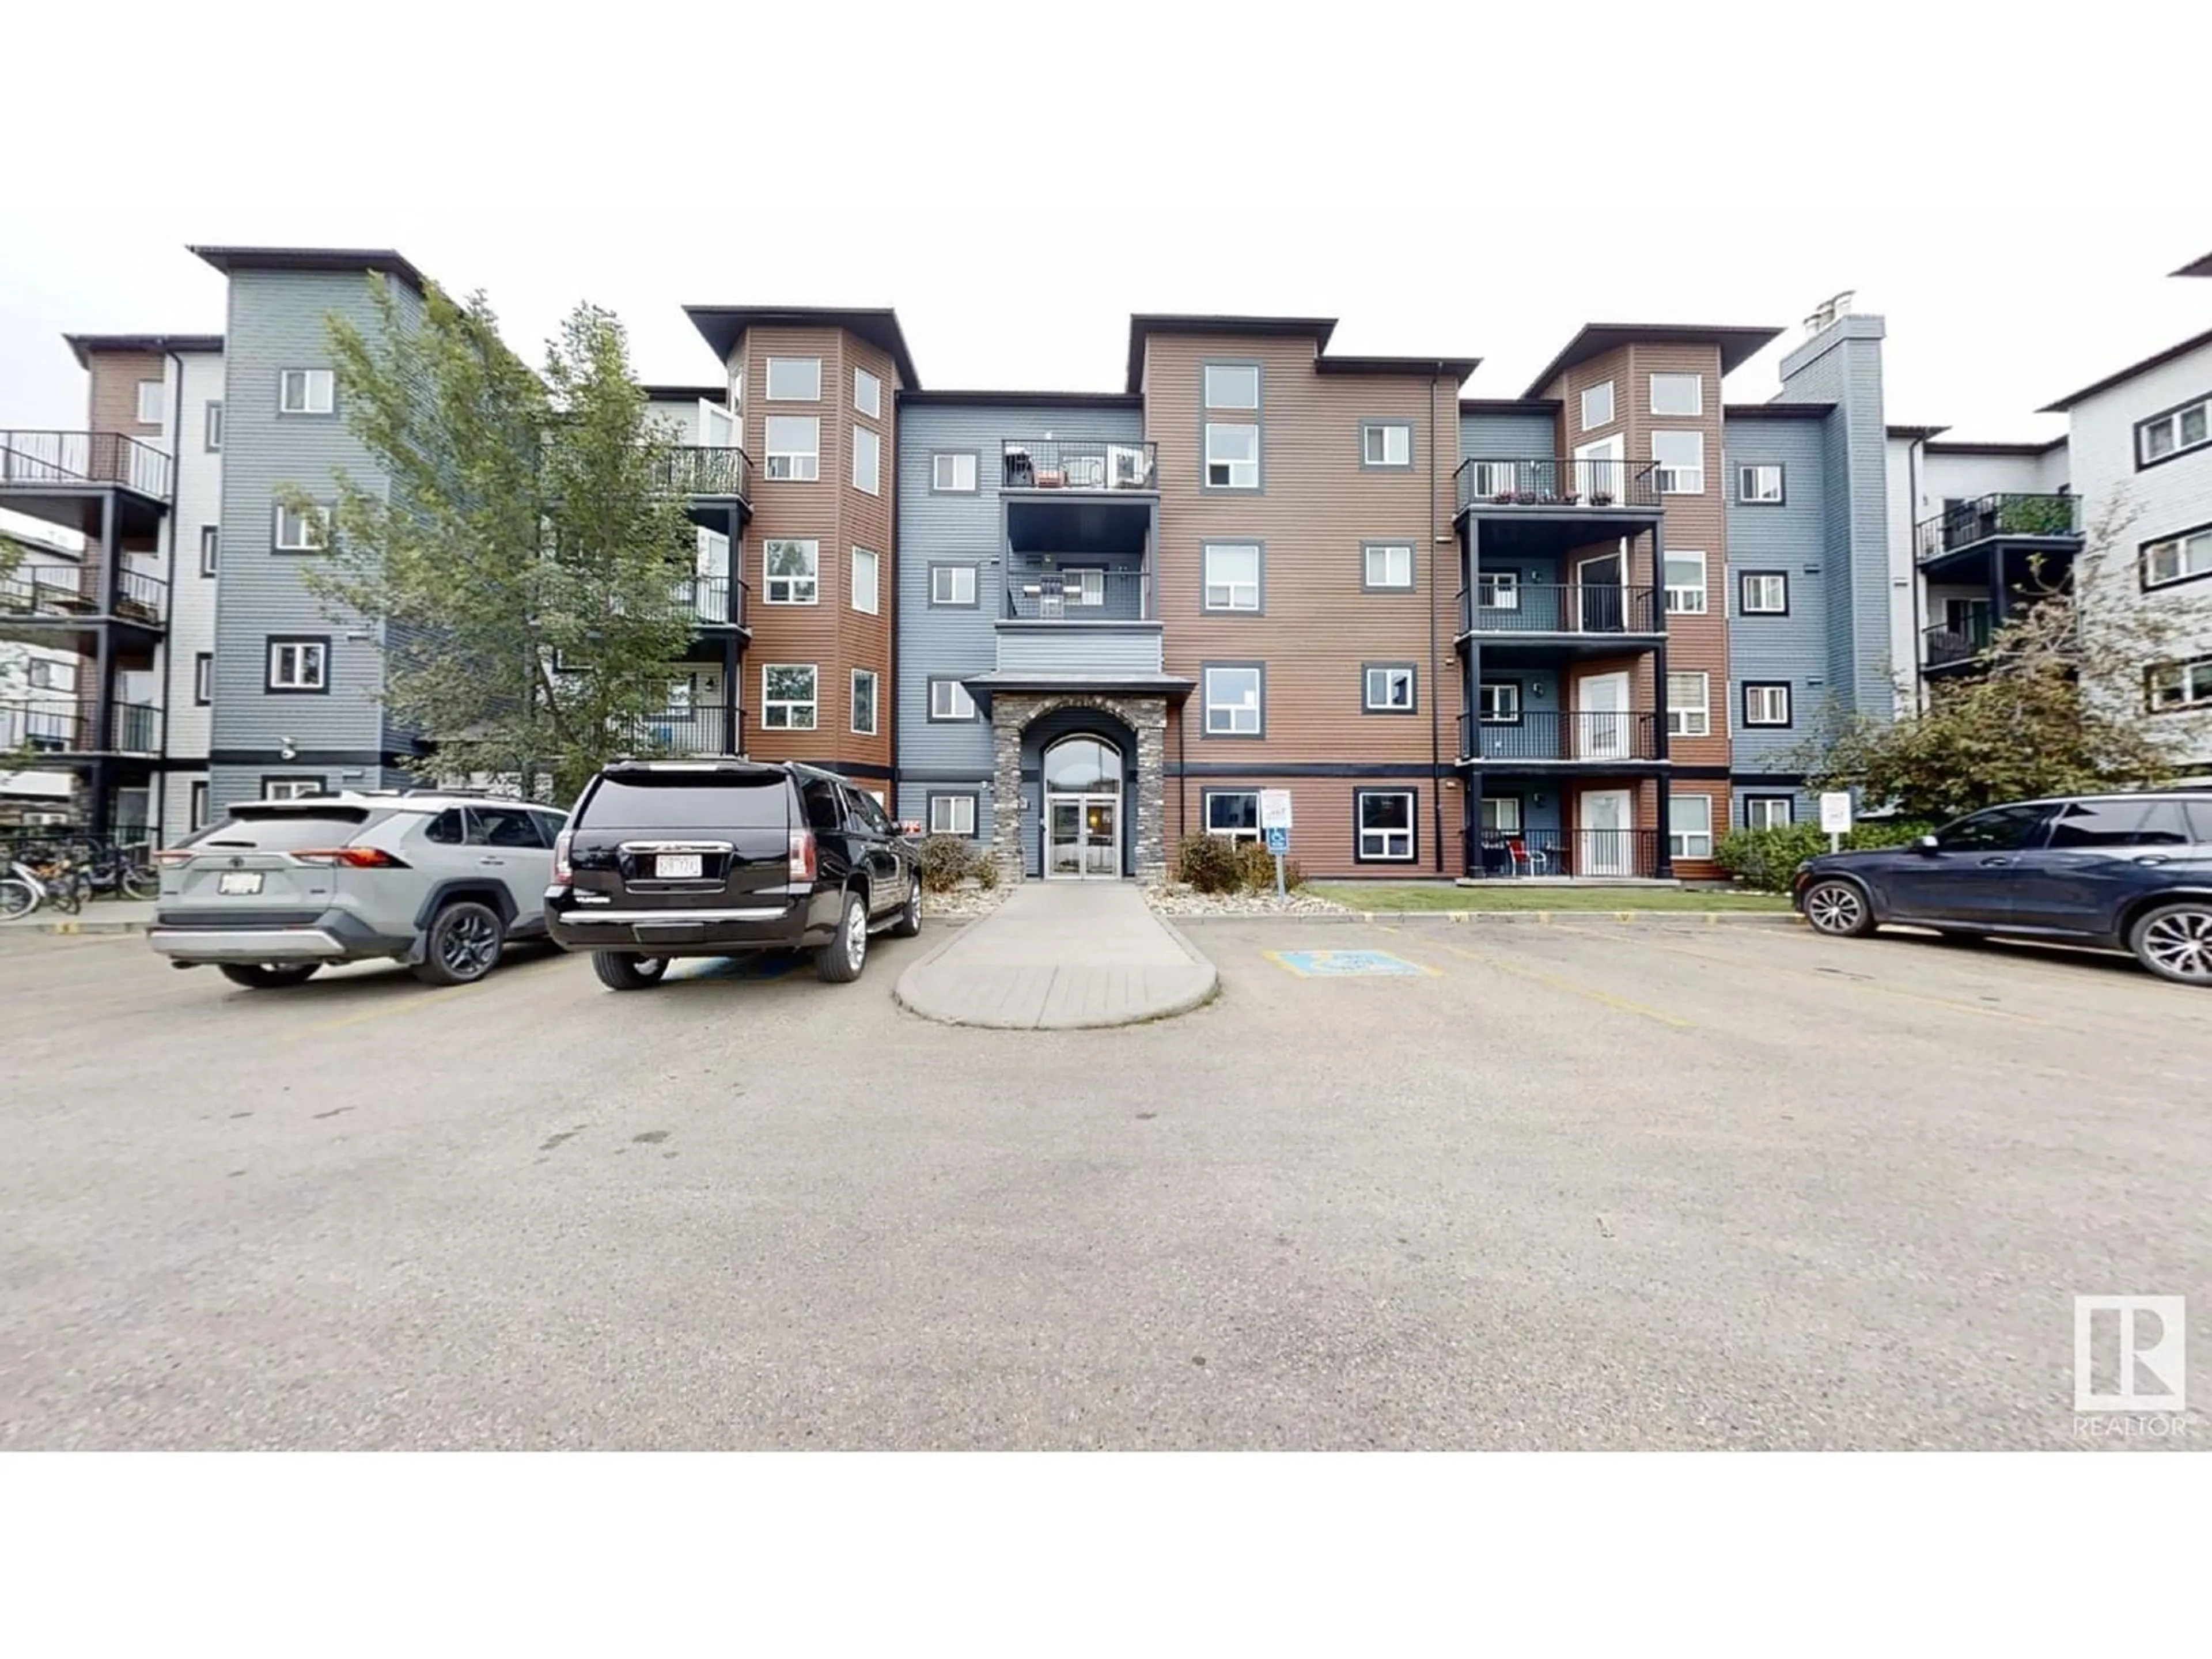 A pic from exterior of the house or condo for #315 396 SILVER BERRY RD NW, Edmonton Alberta T6T0H1